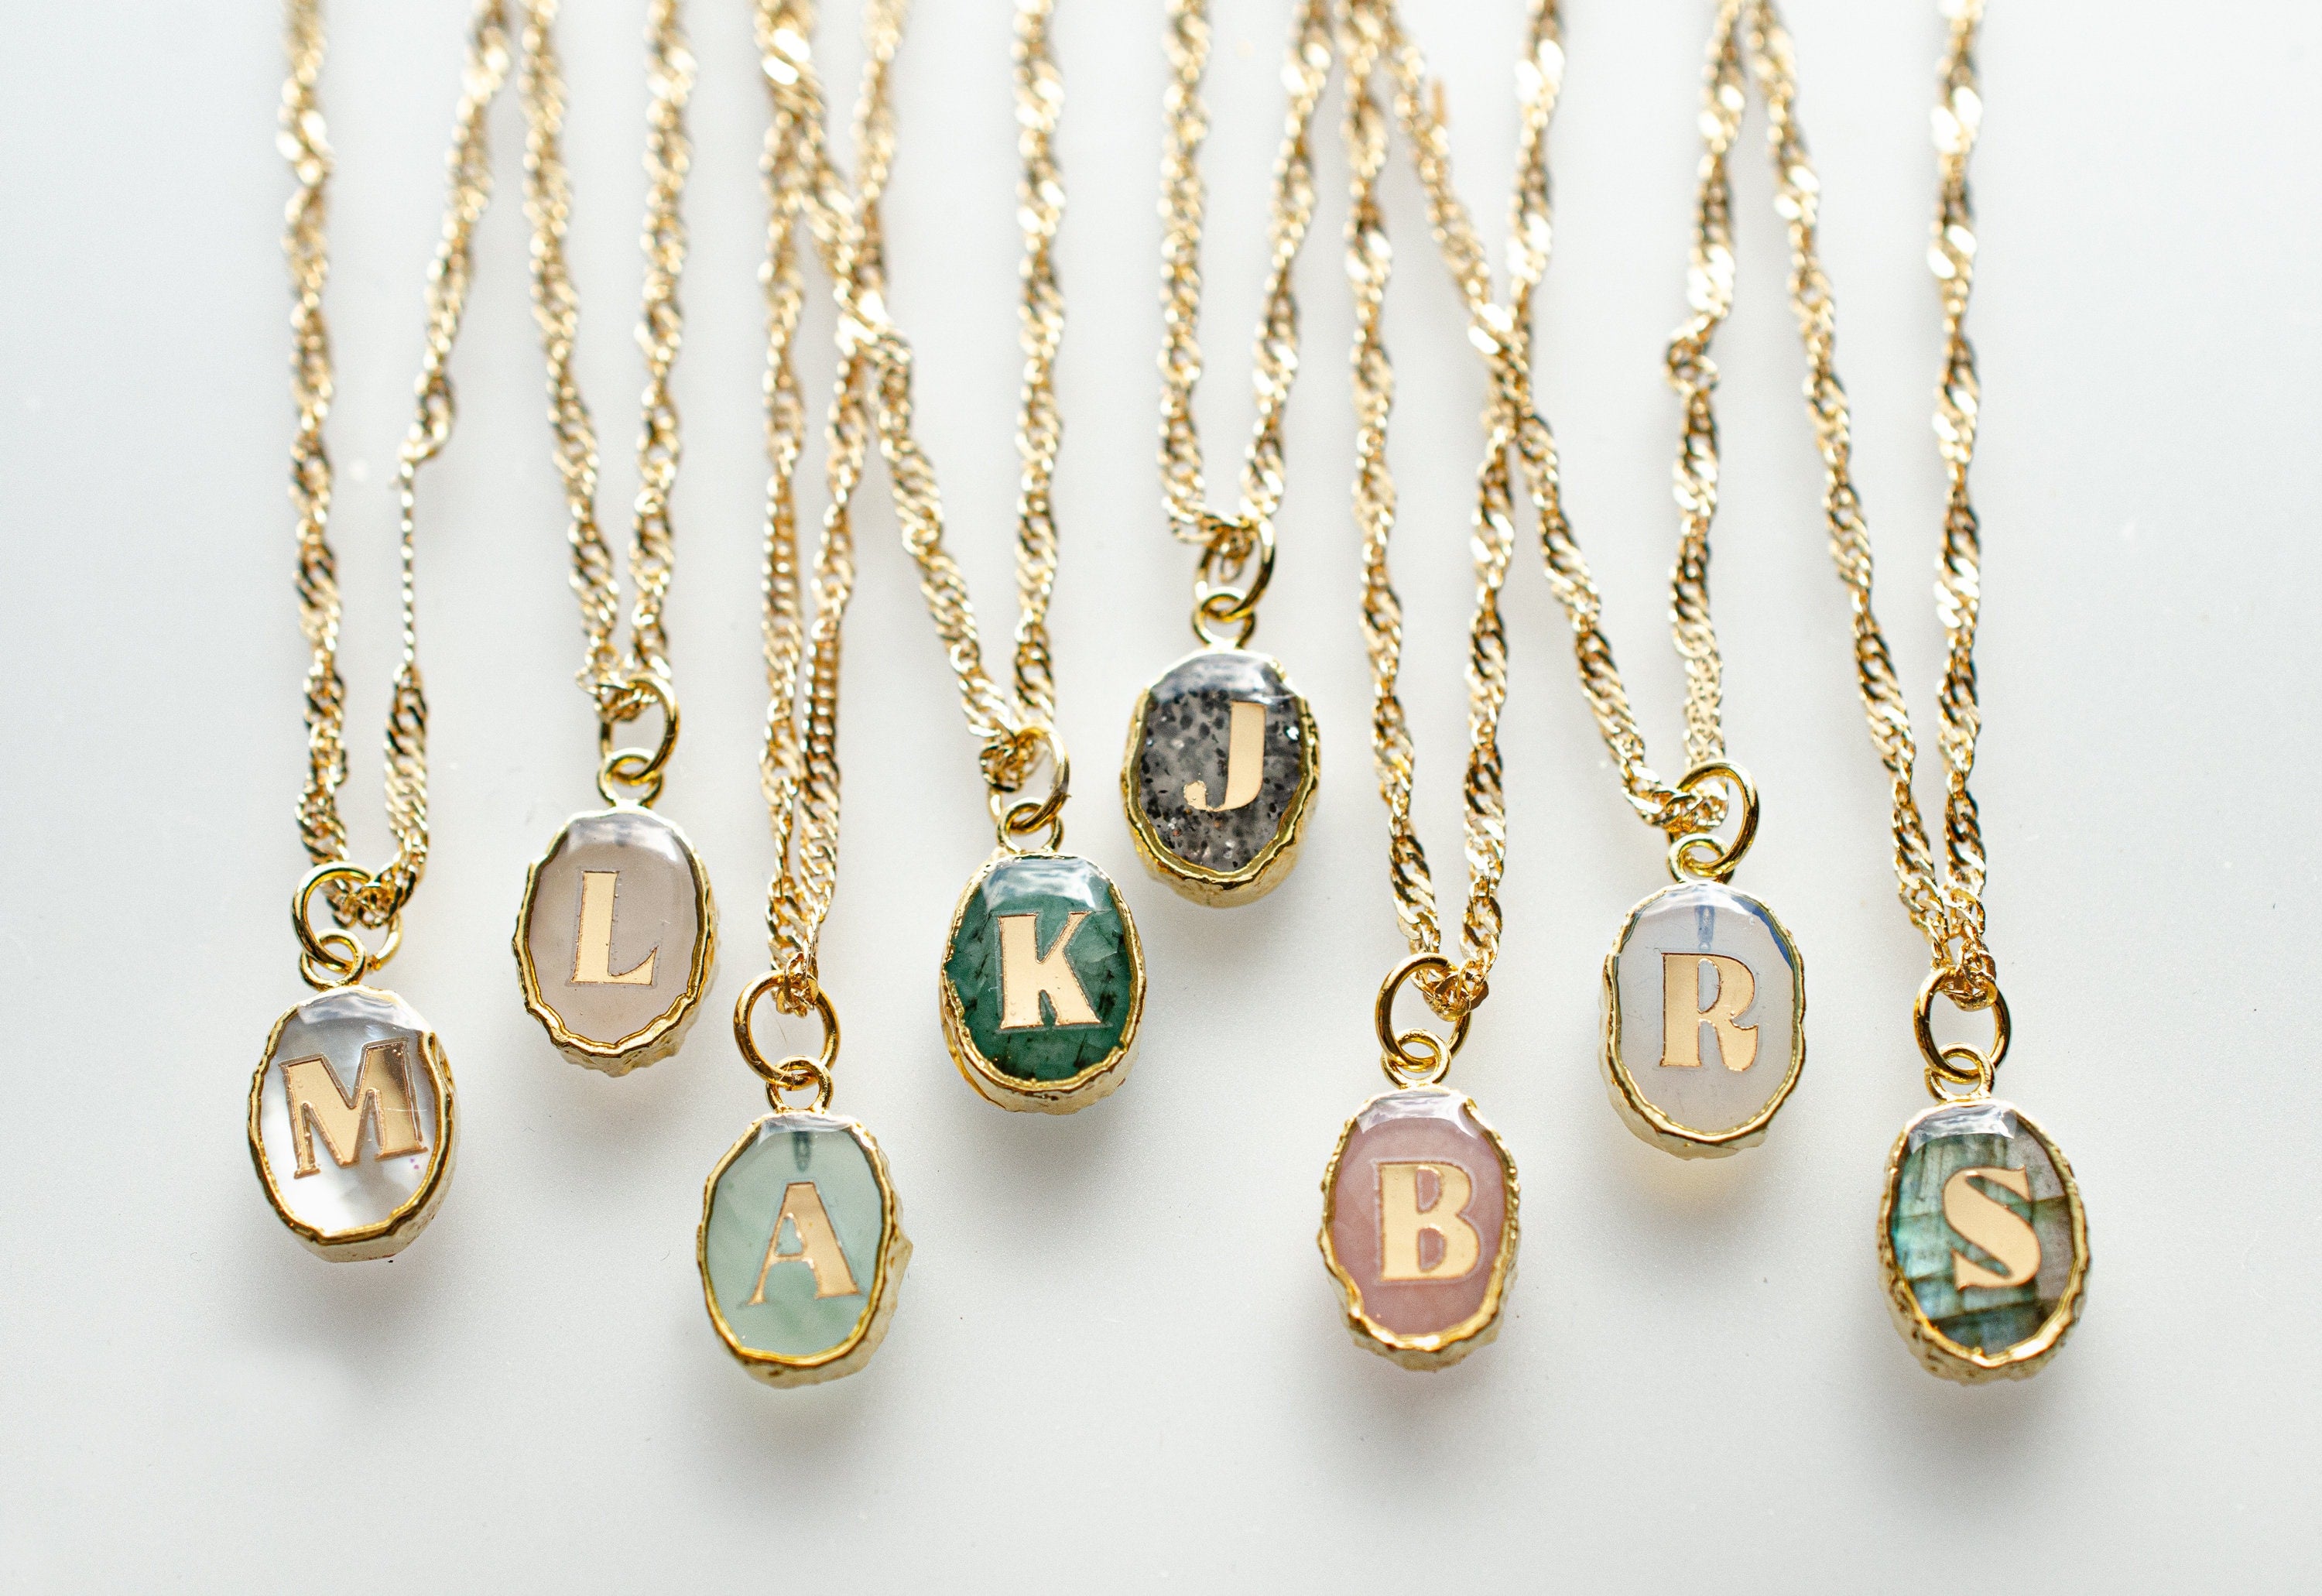 How to Choose the Best Chain for Pendants - The Caratlane